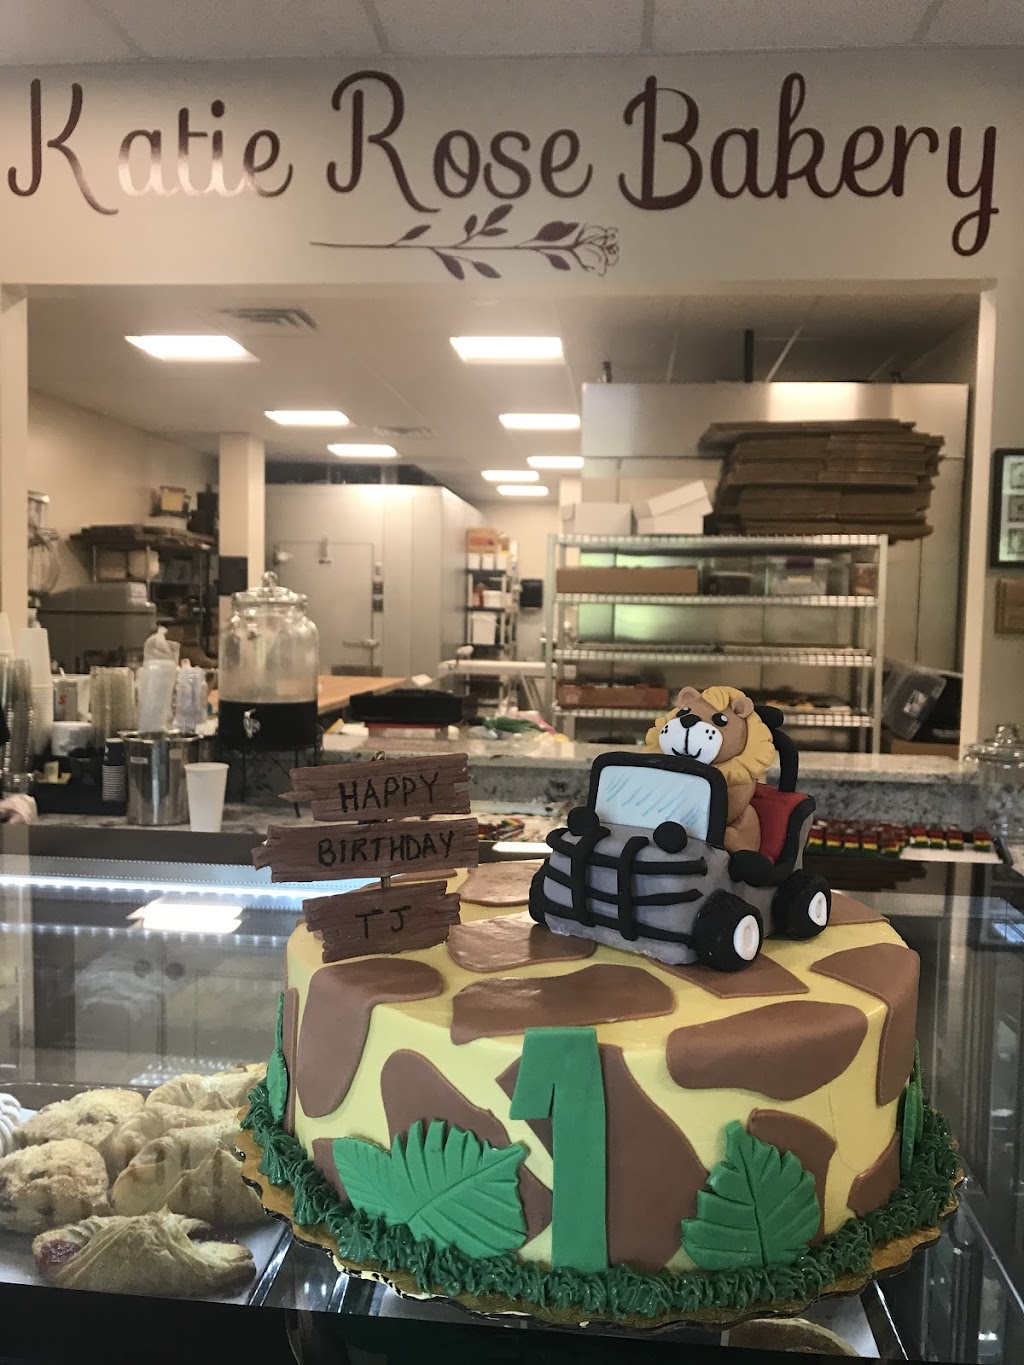 Katie Rose Bakery | 107 NY-376 Suite 5, Hopewell Junction, NY 12533 | Phone: (845) 447-2144